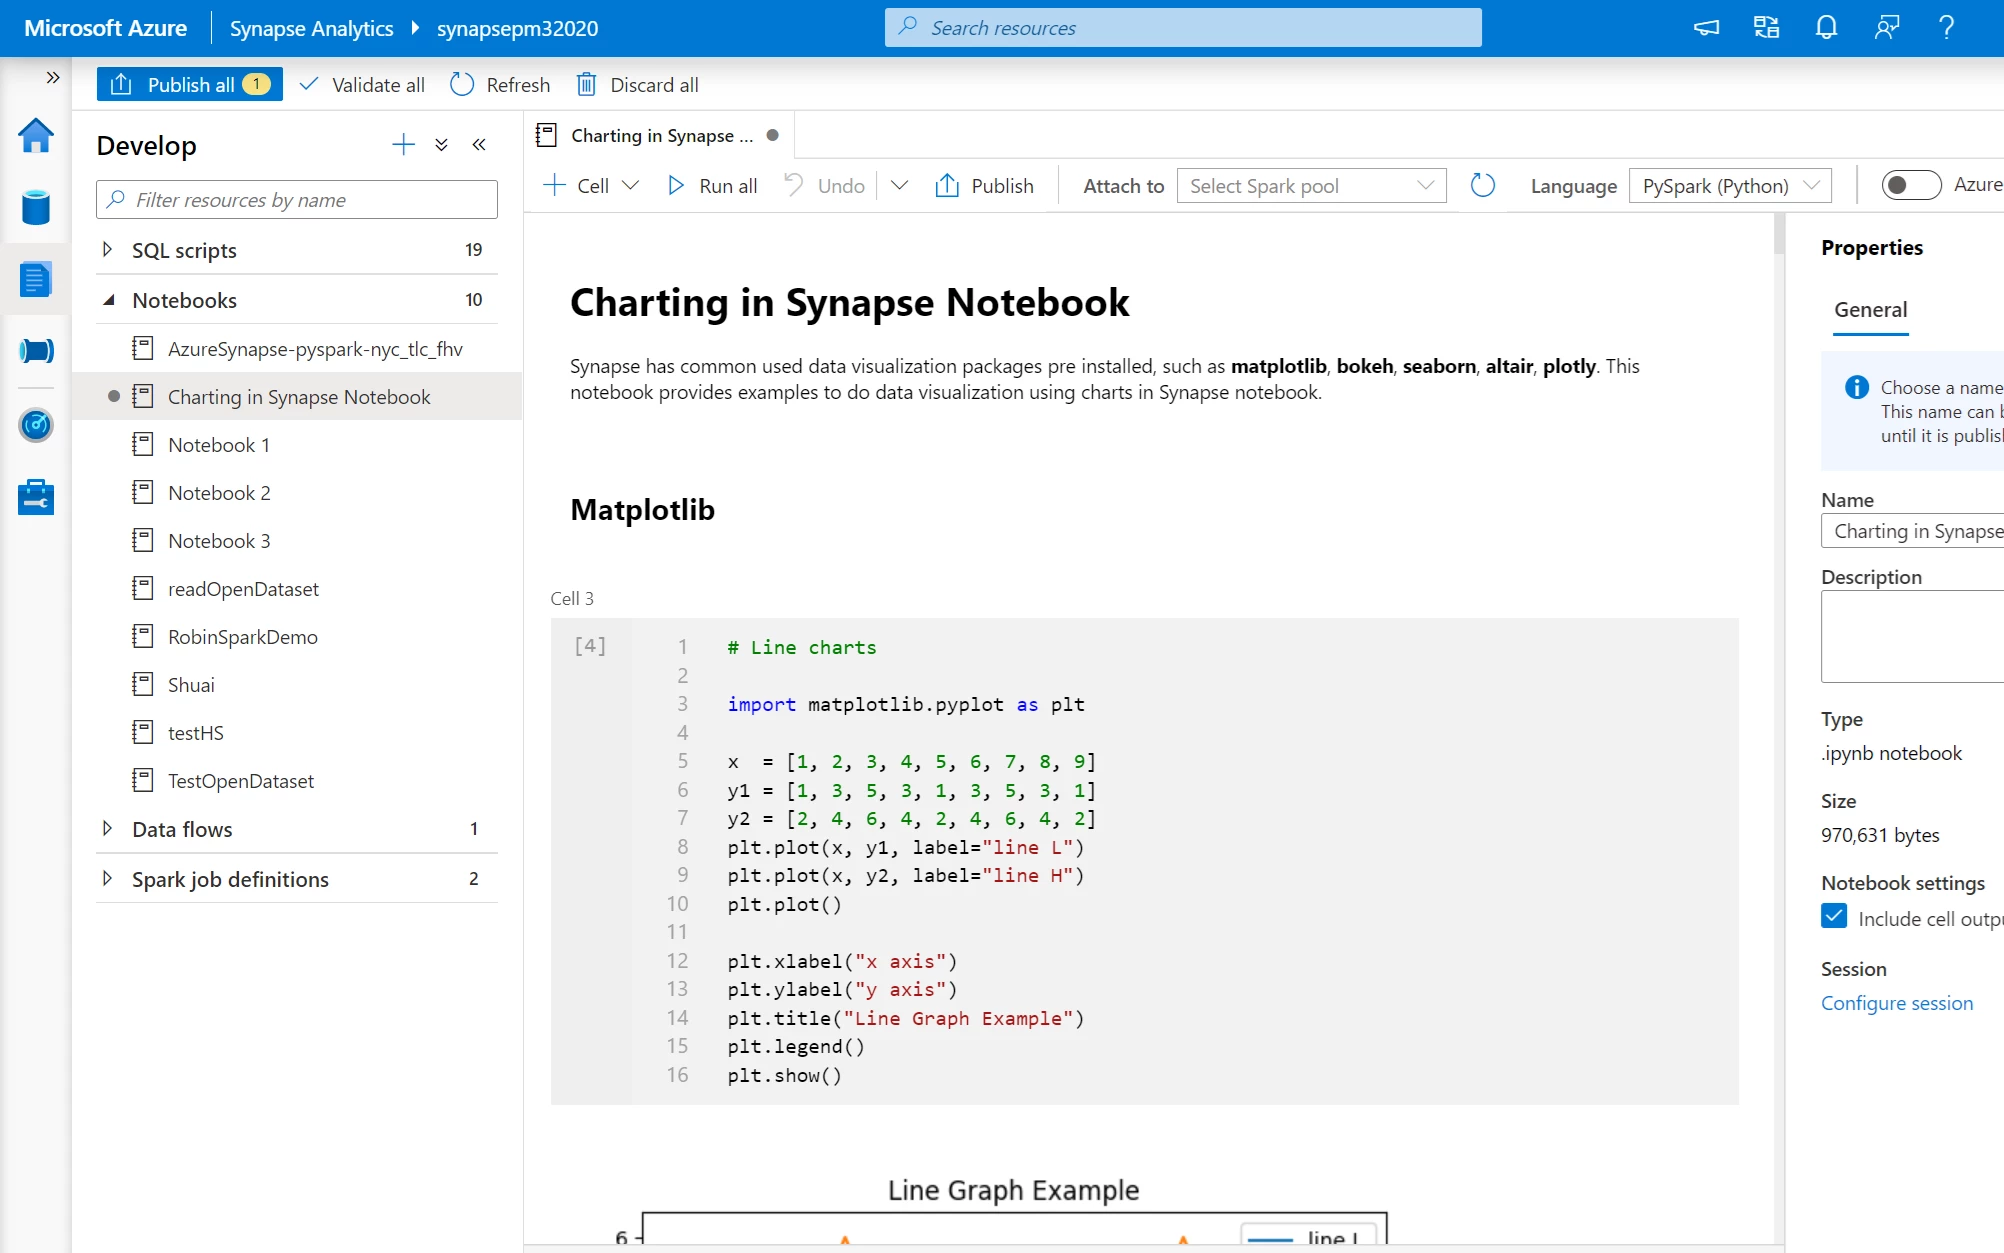 Sample notebooks appear in the Develop hub of the Azure Synapse Studio under Notebooks.